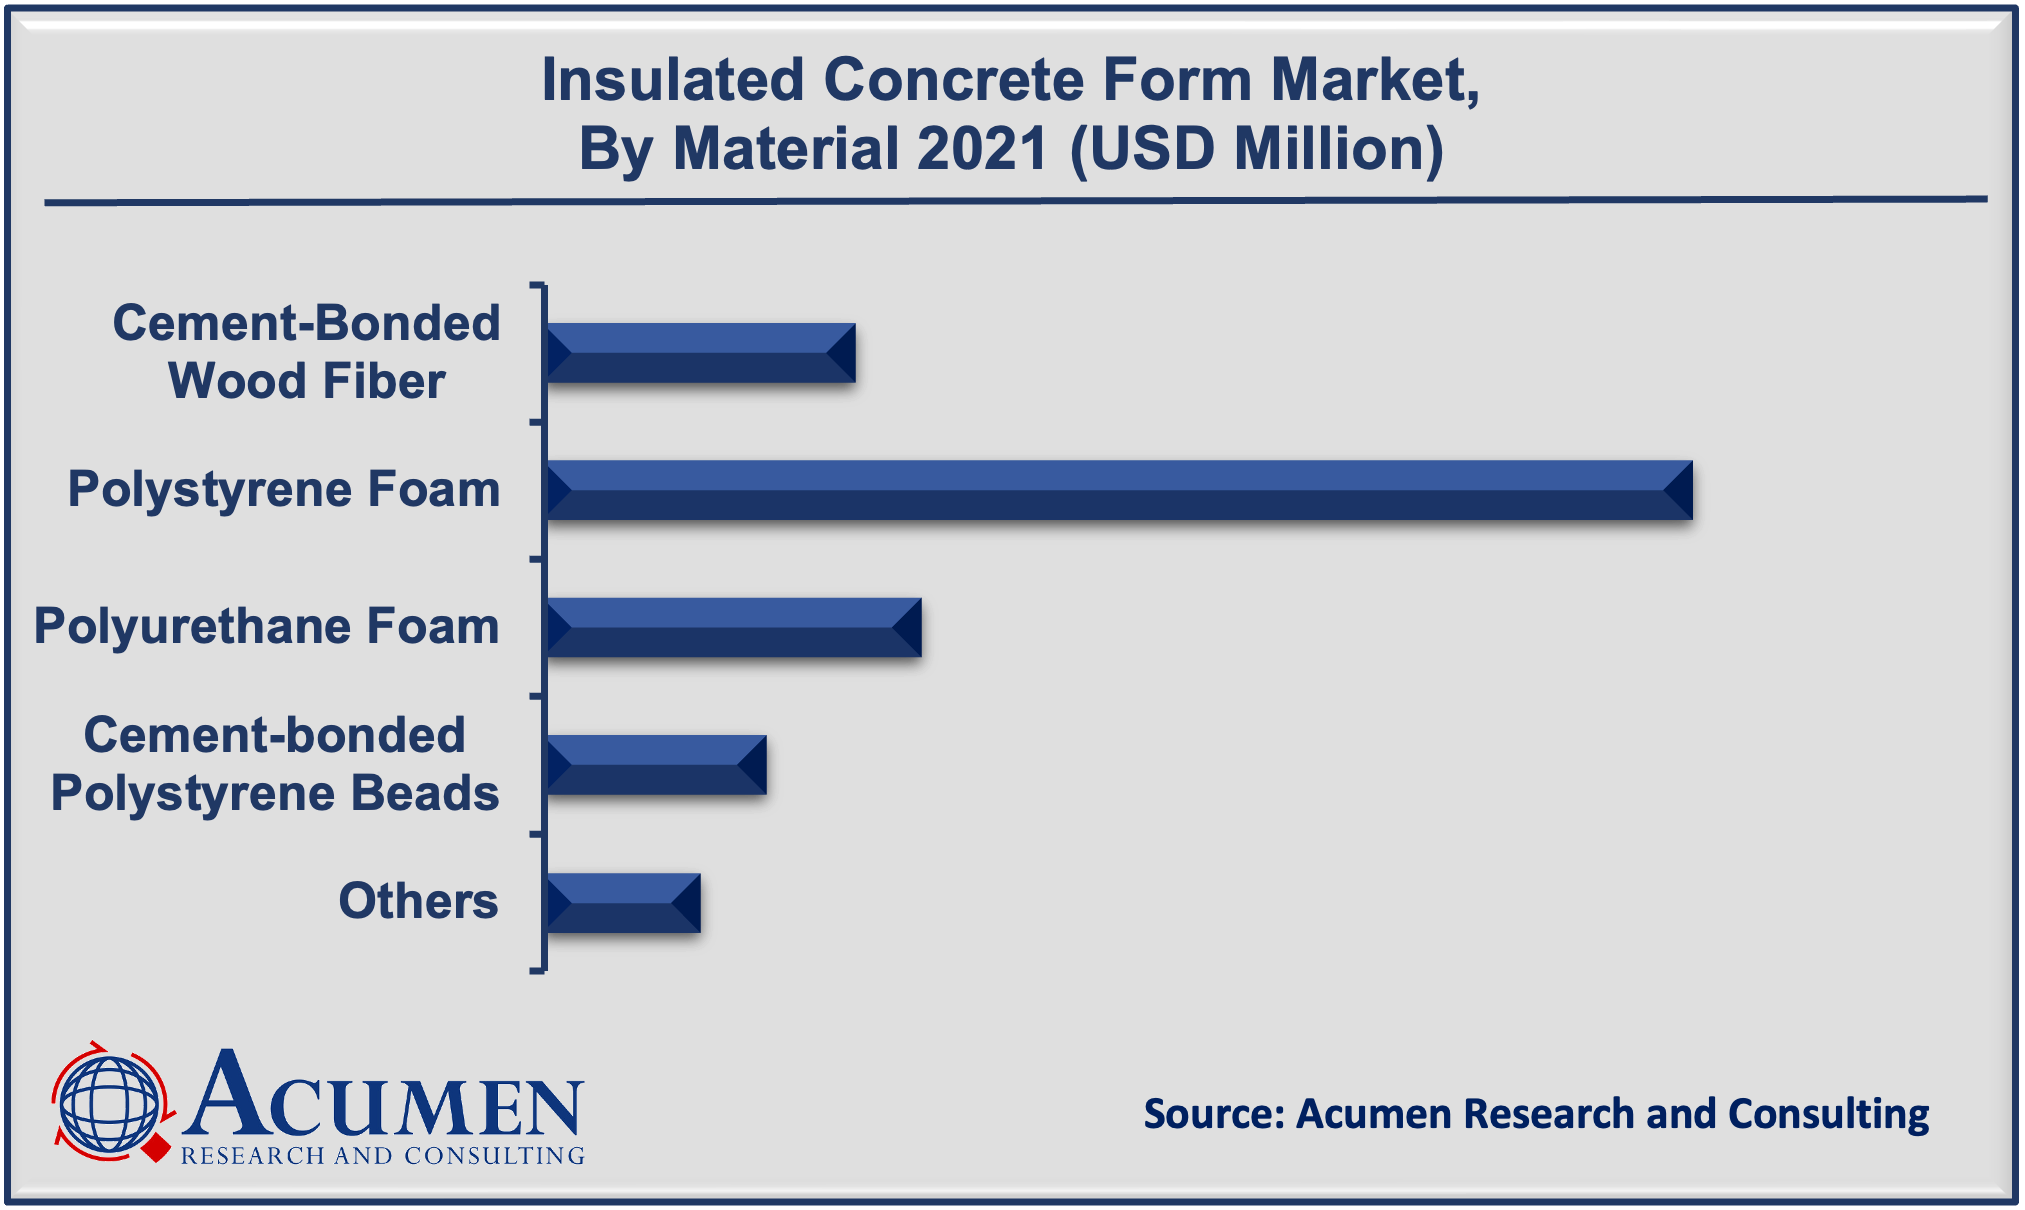 Insulated Concrete Form Market Size was valued at USD 1,138 Million in 2021 and is projected to reach the market value of USD 1,852 Million by 2030